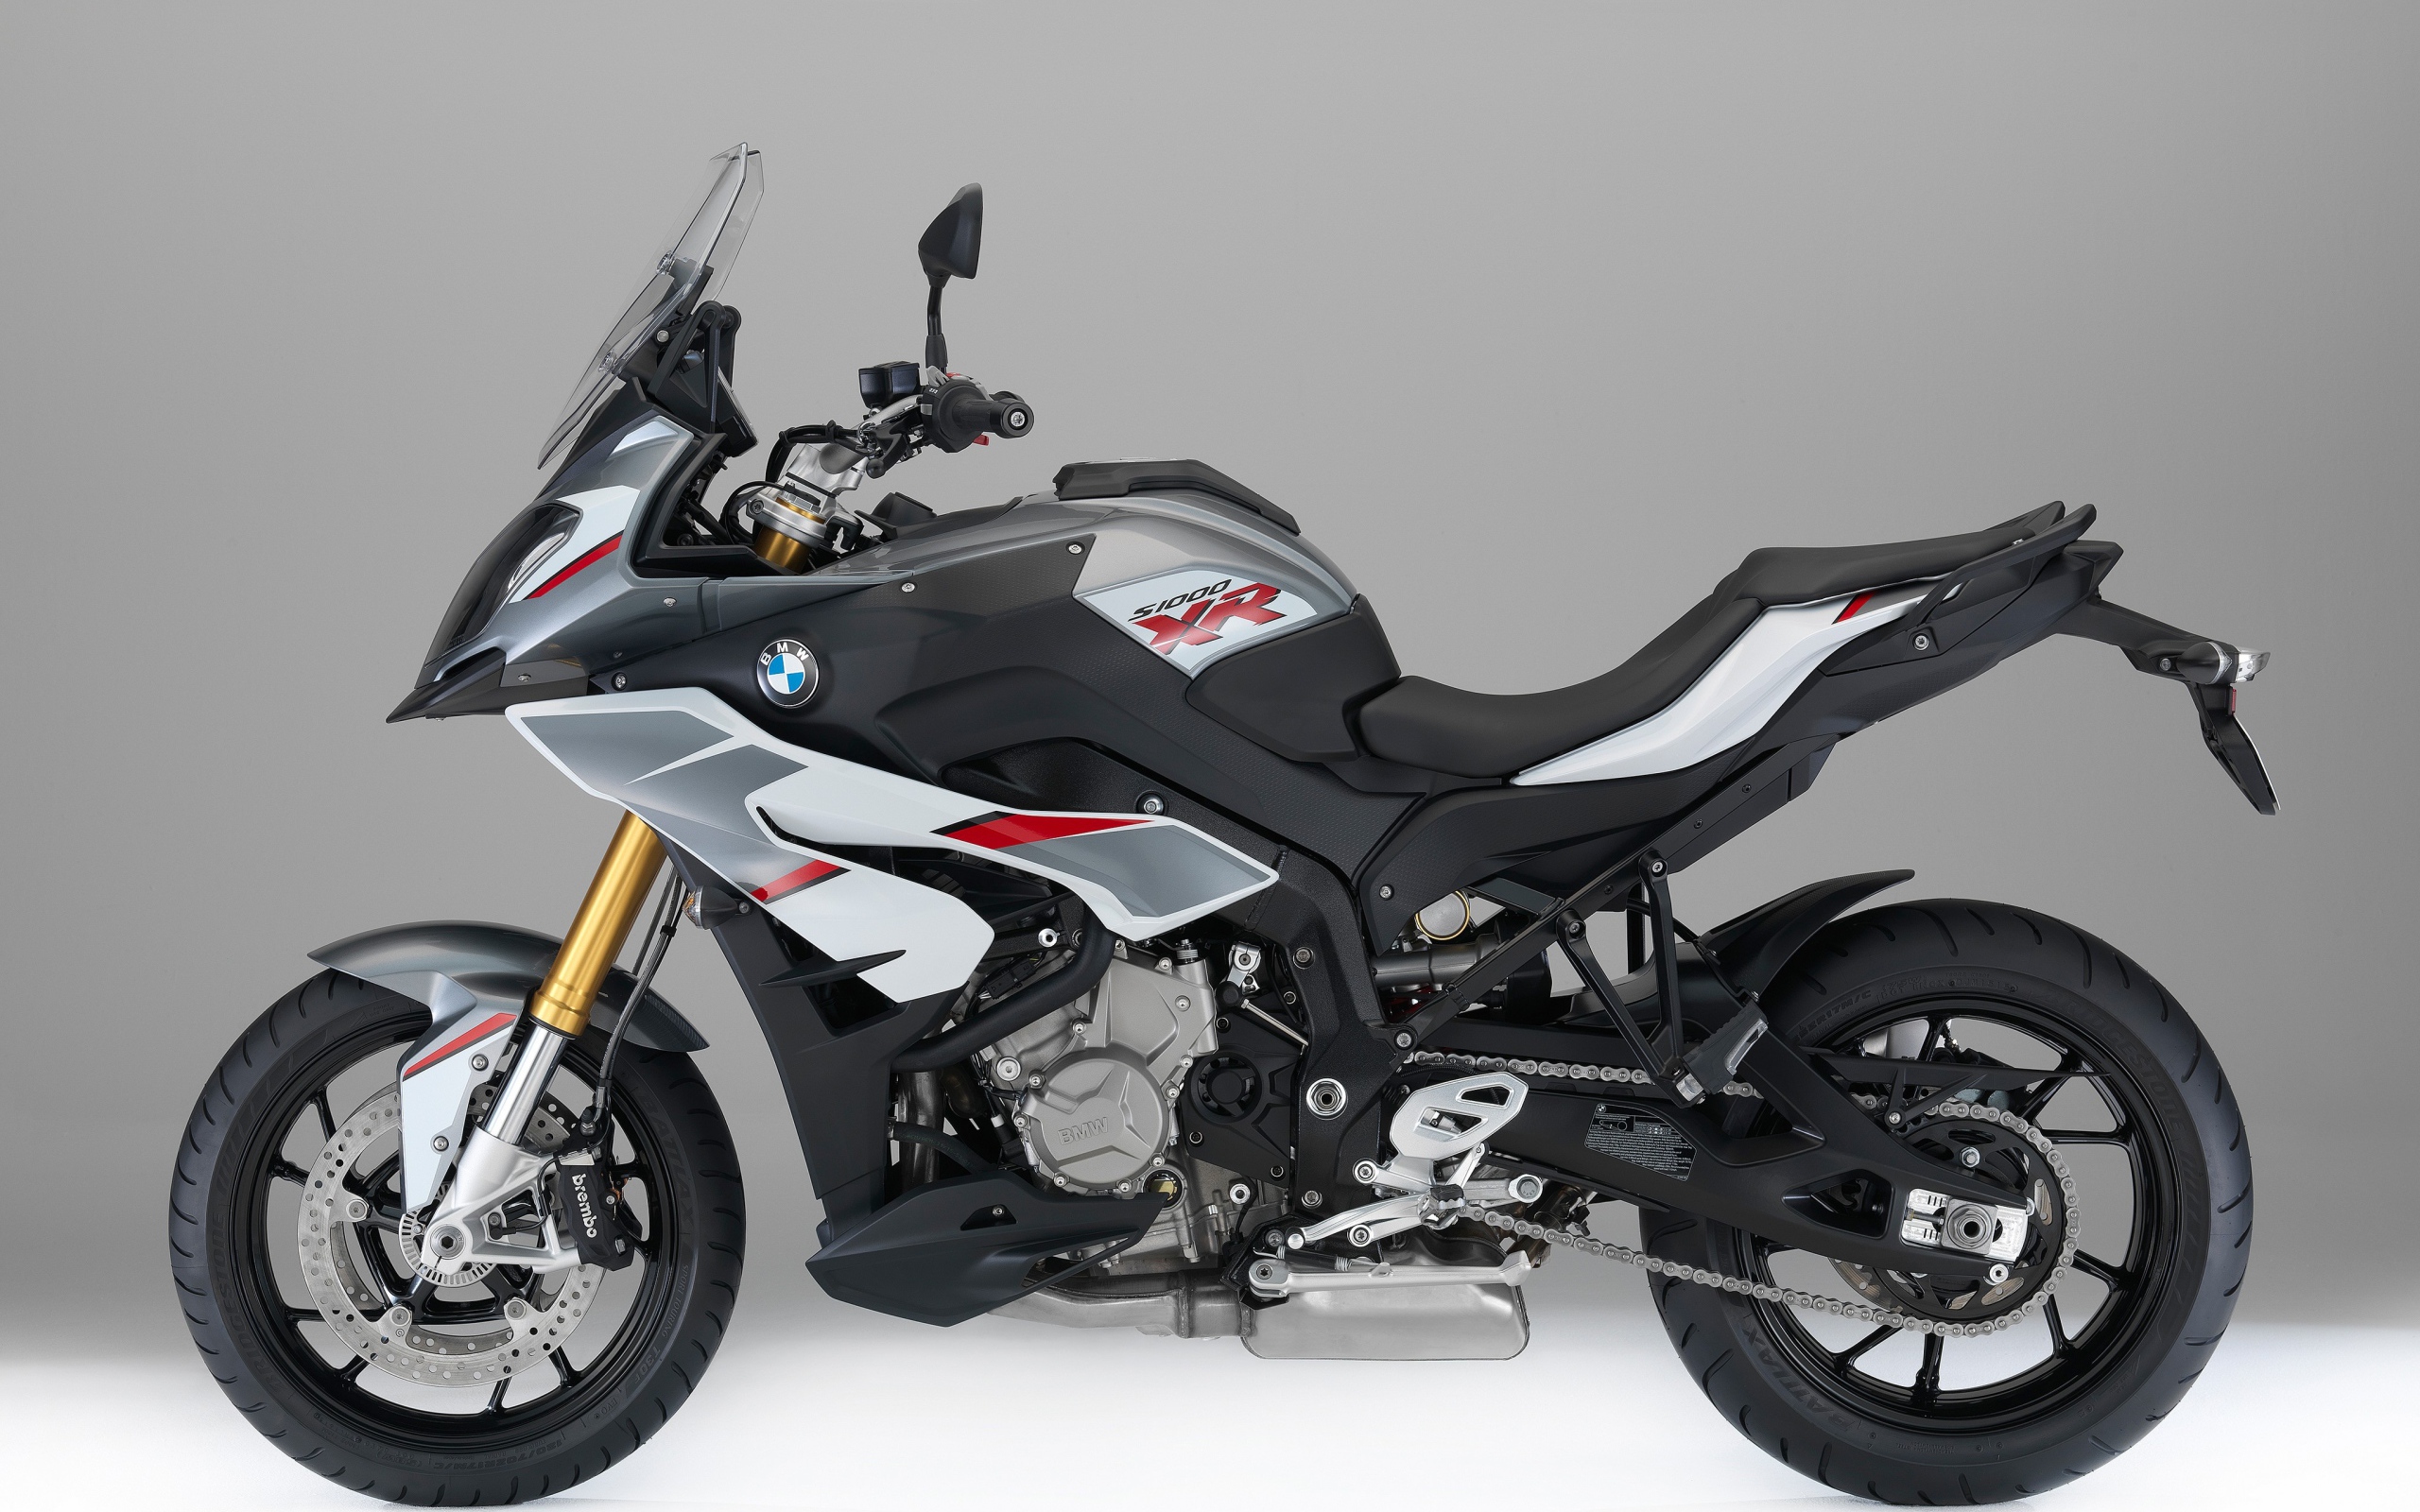 BMW S1000 racing motorcycle on a gray background